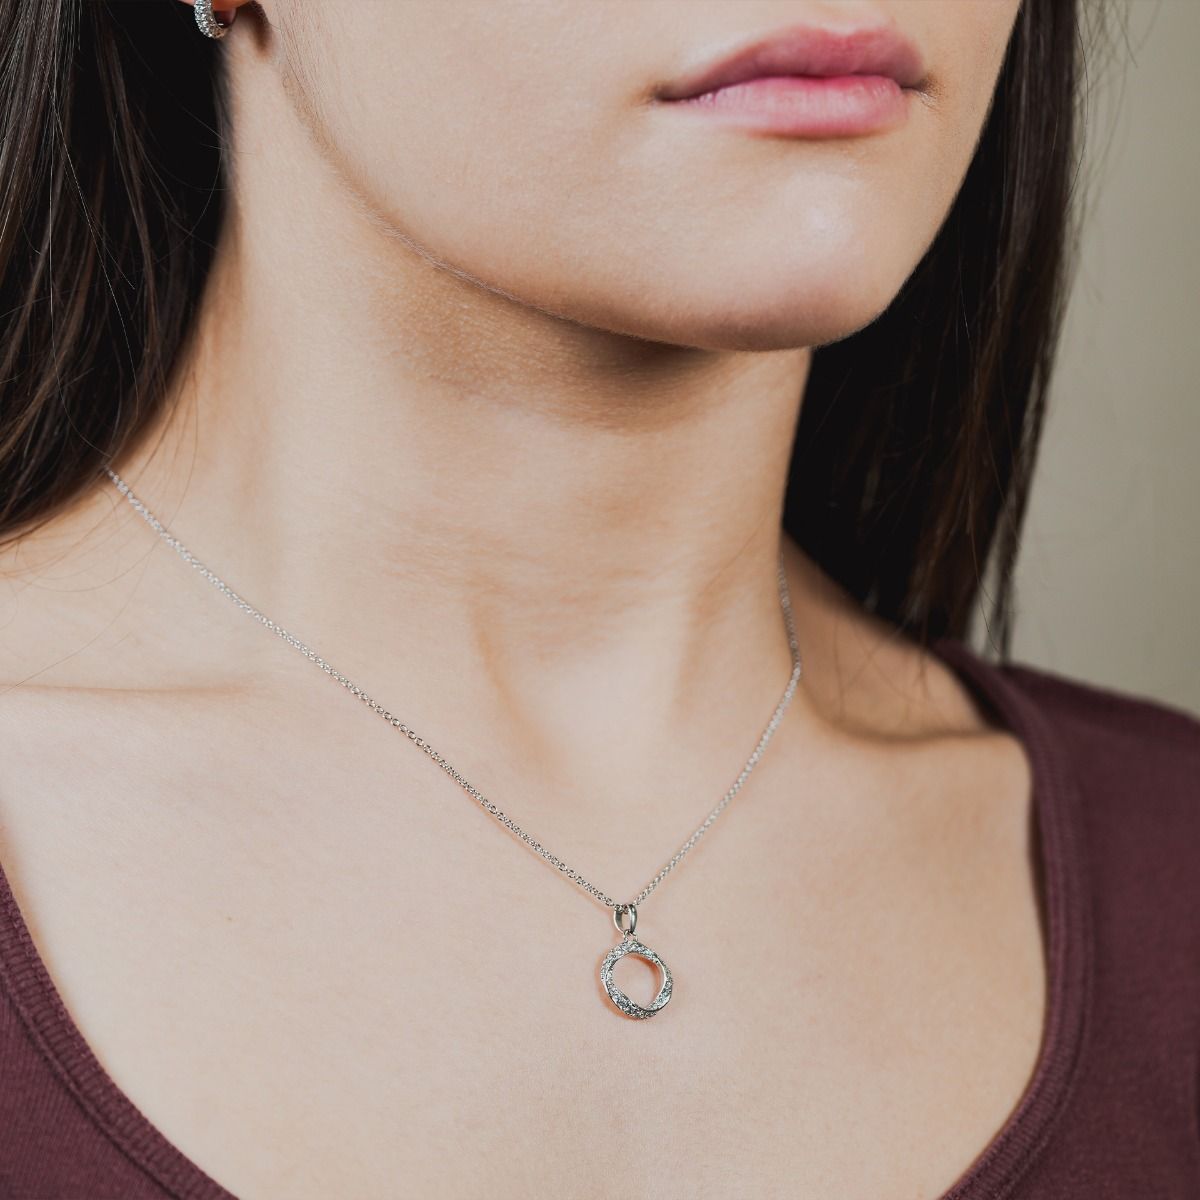 Elegance meets charm with our Viennese Hoop Necklace. Its captivating design showcases a delicate whipped Viennese swirl, elegantly intertwining a lustrous polished band with sparkling cubic zirconia. Elevate your style with this exquisite accessory, a pe